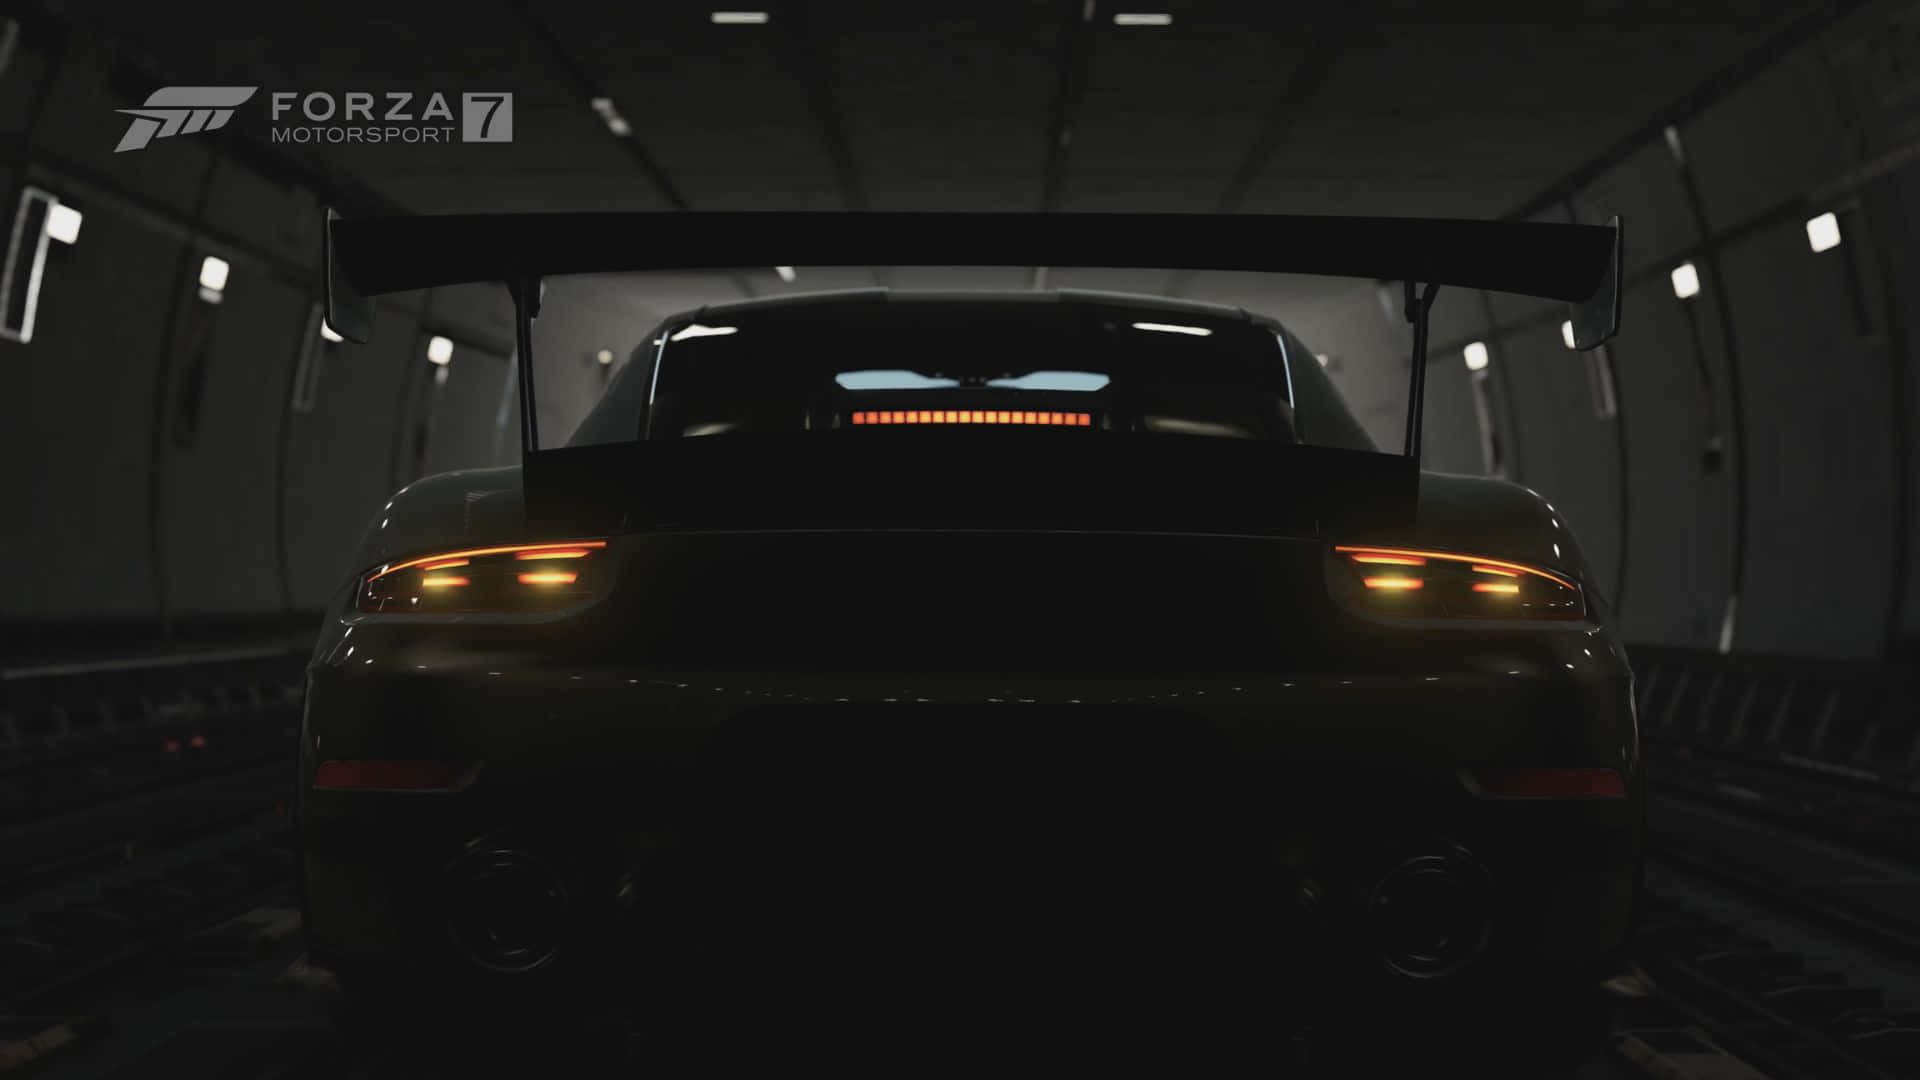 Hd Forza Motorsport 7 Background Inside The Tunnel